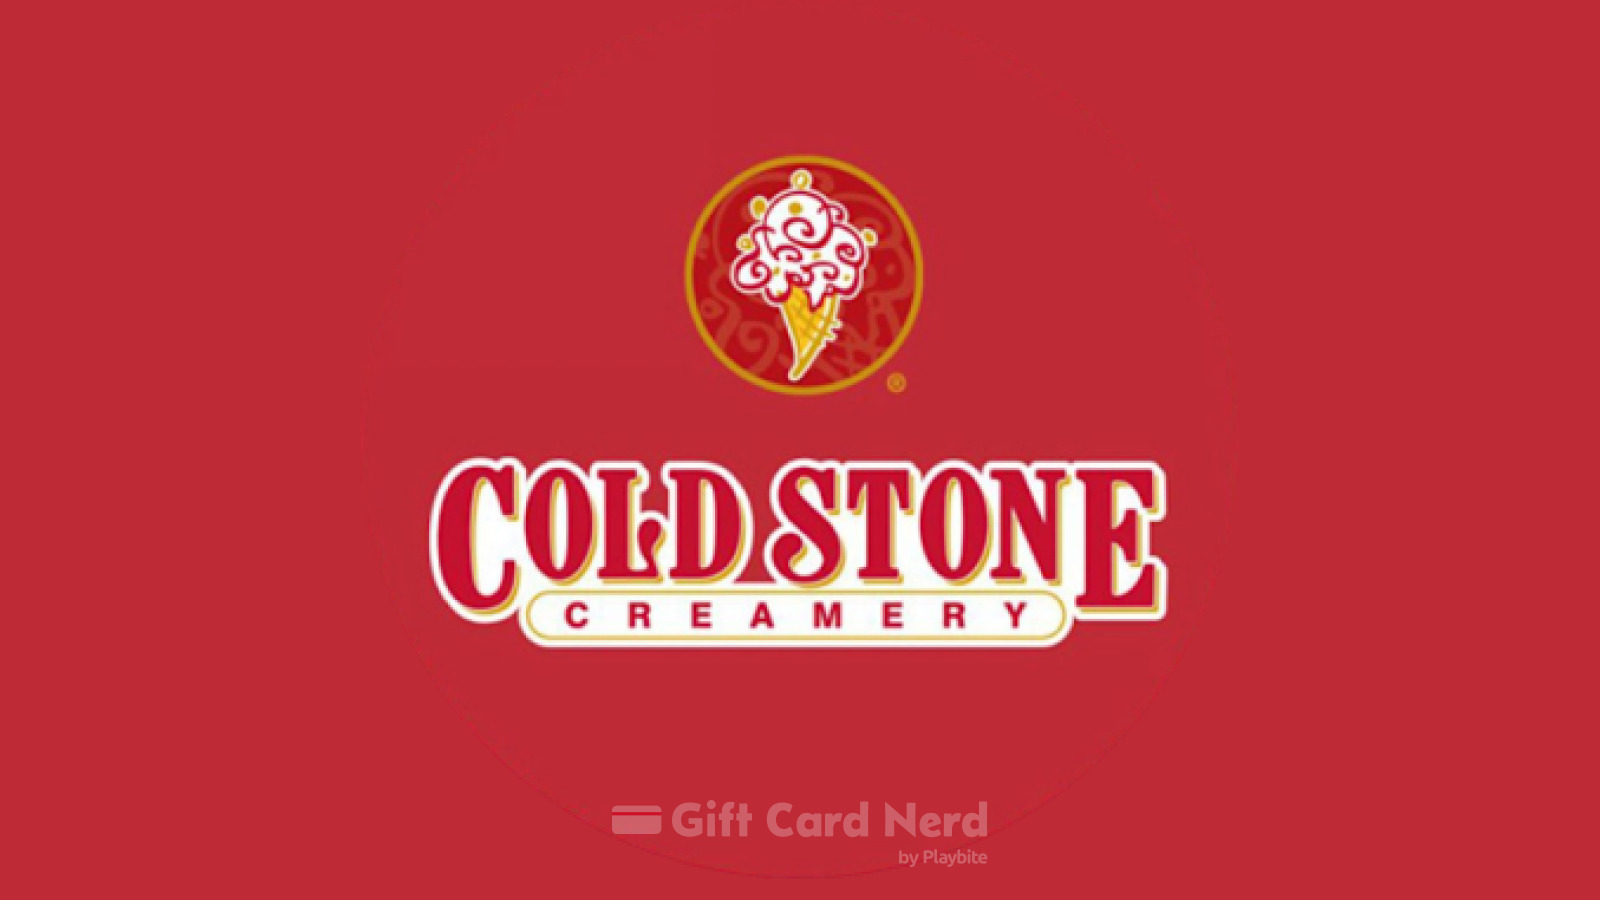 Does CVS Sell Cold Stone Creamery Gift Cards?